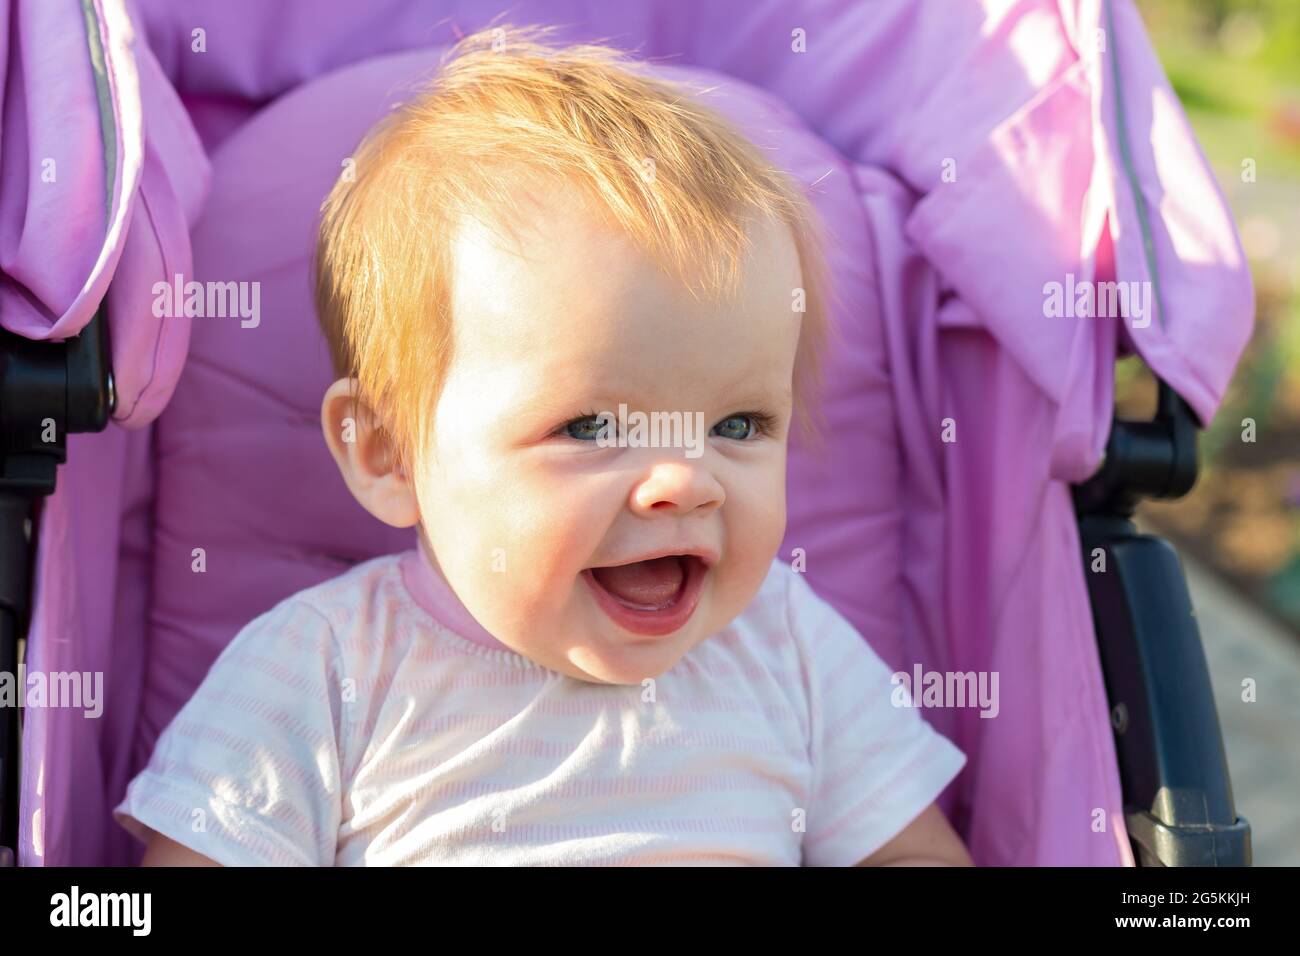 Portrait Of A 6 Month Old Baby With White Hair Stock Photo Alamy